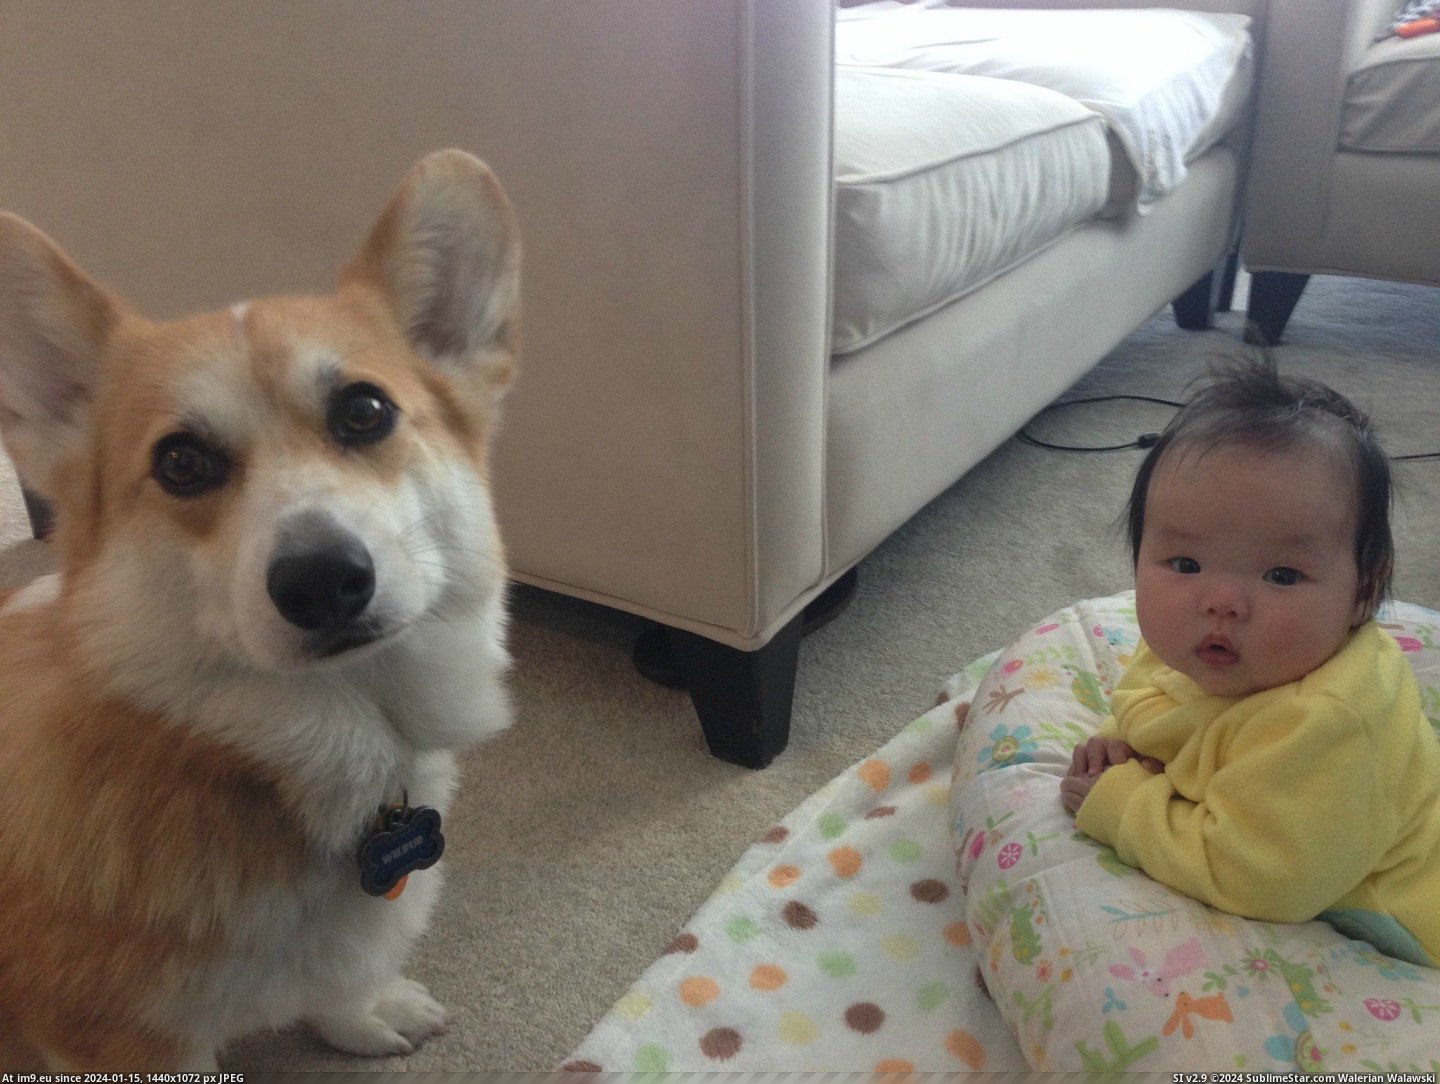 #Old #Likes #Daughter #Depressed #Counseli #Psychiatrist #Month #Corgi #Lie [Aww] My corgi likes to lie down next to my 4 month old daughter. It looks like he's depressed and she's a psychiatrist counseli Pic. (Изображение из альбом My r/AWW favs))